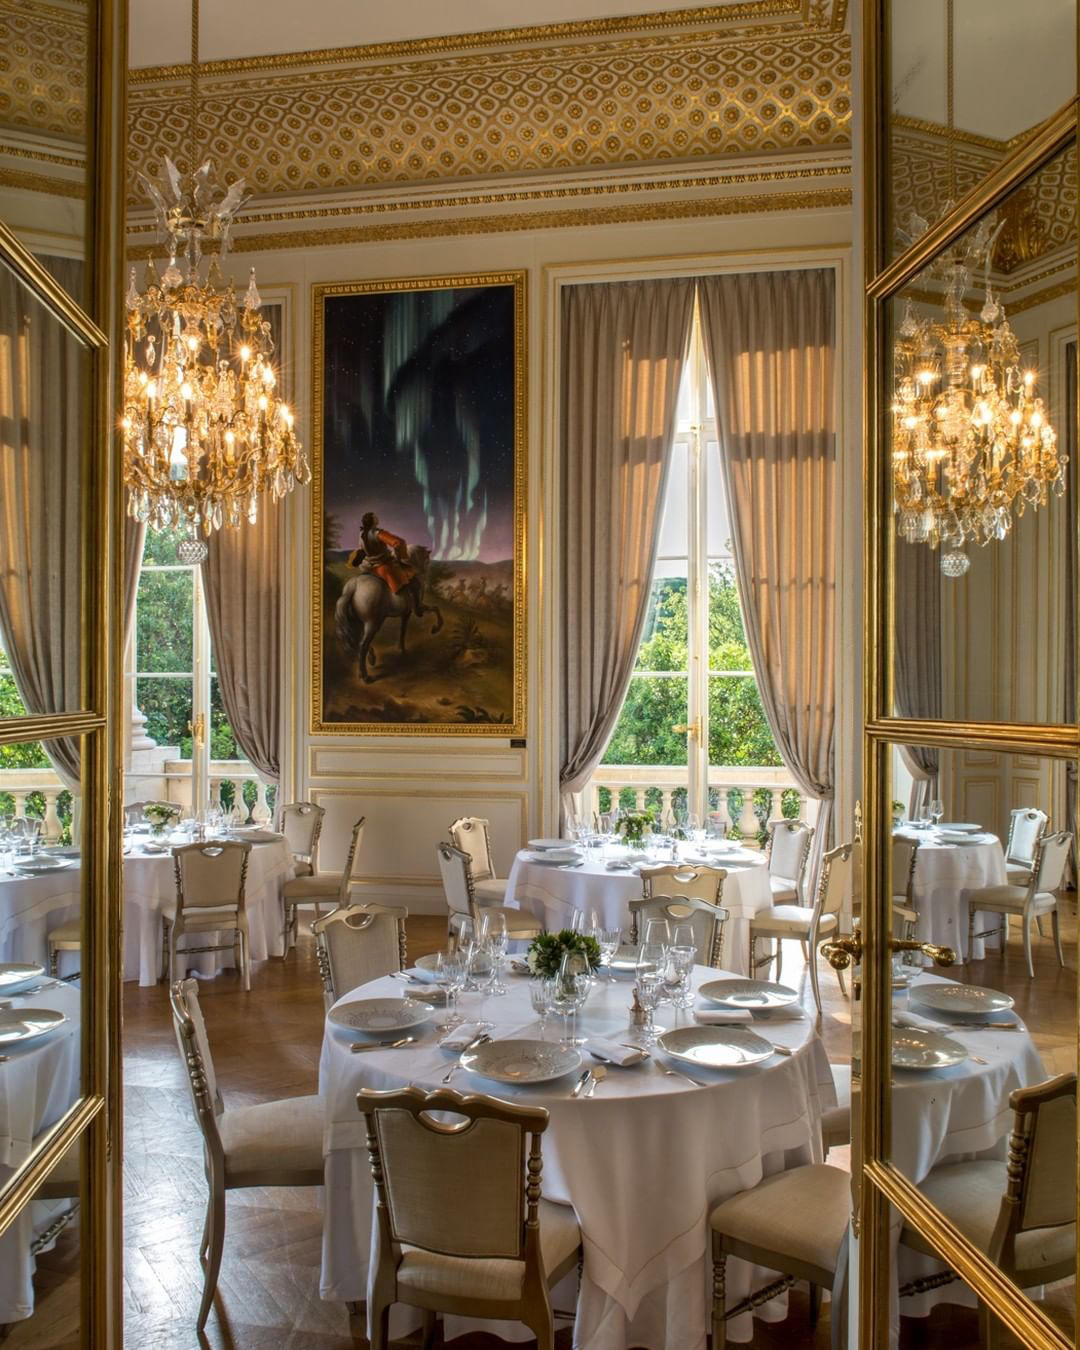 image  1 Hôtel de Crillon - Birthday, wedding, Baby Shower, … - We always have a good reason to celebrate with friends and